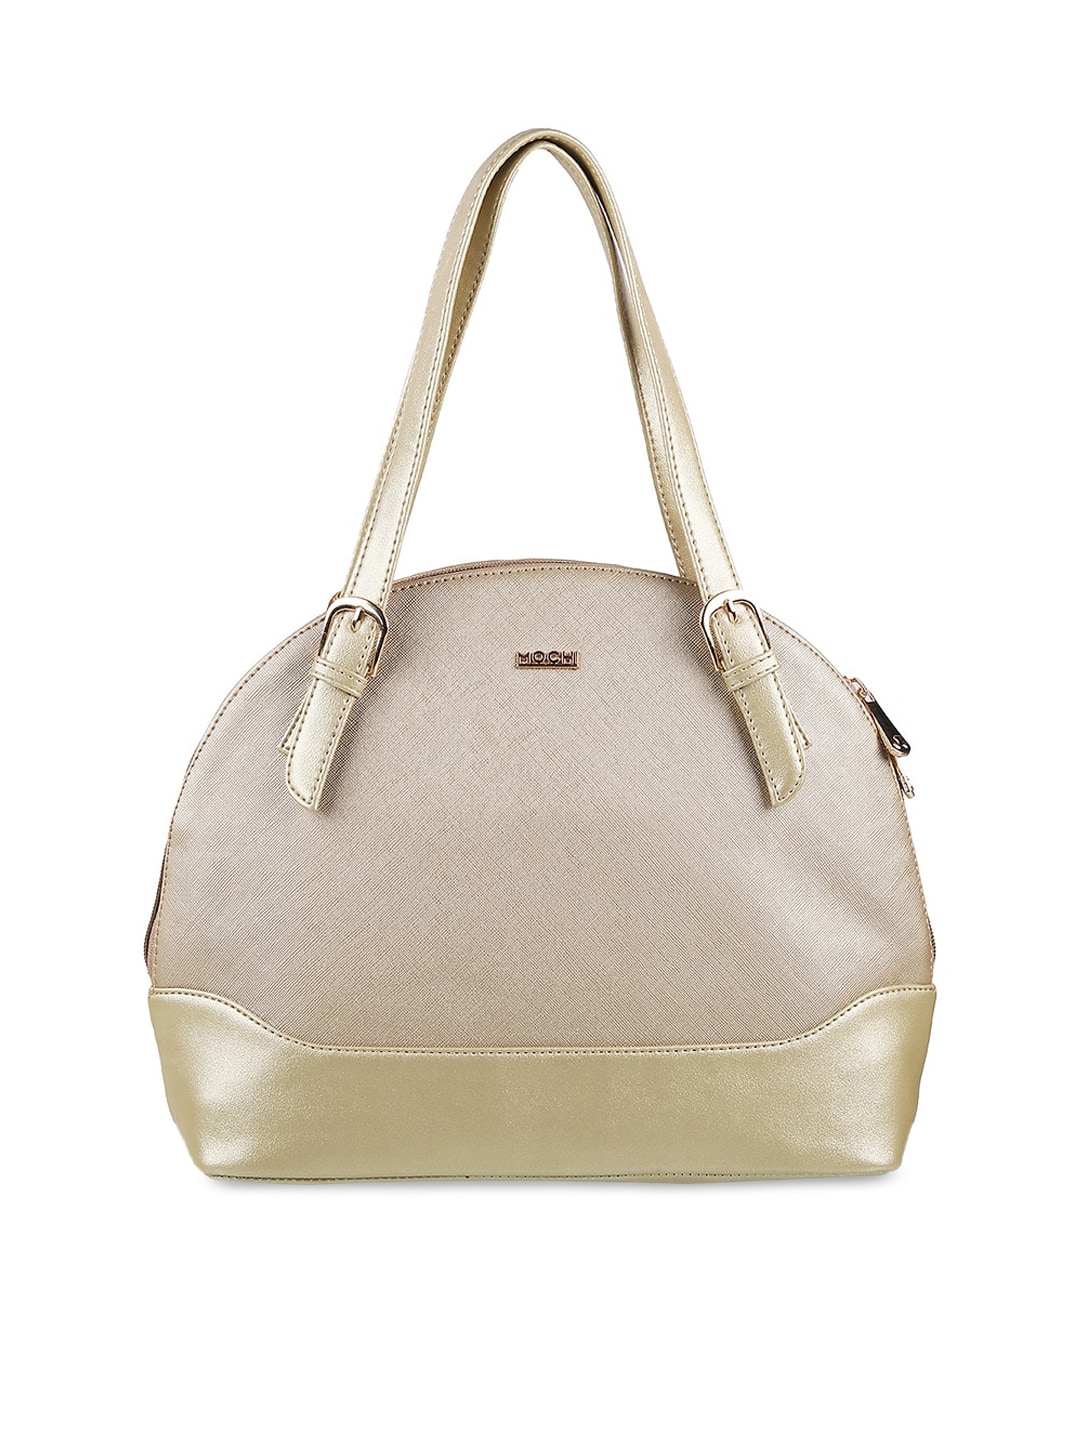 Mochi Women Gold-Toned PU Structured Handheld Bag Price in India